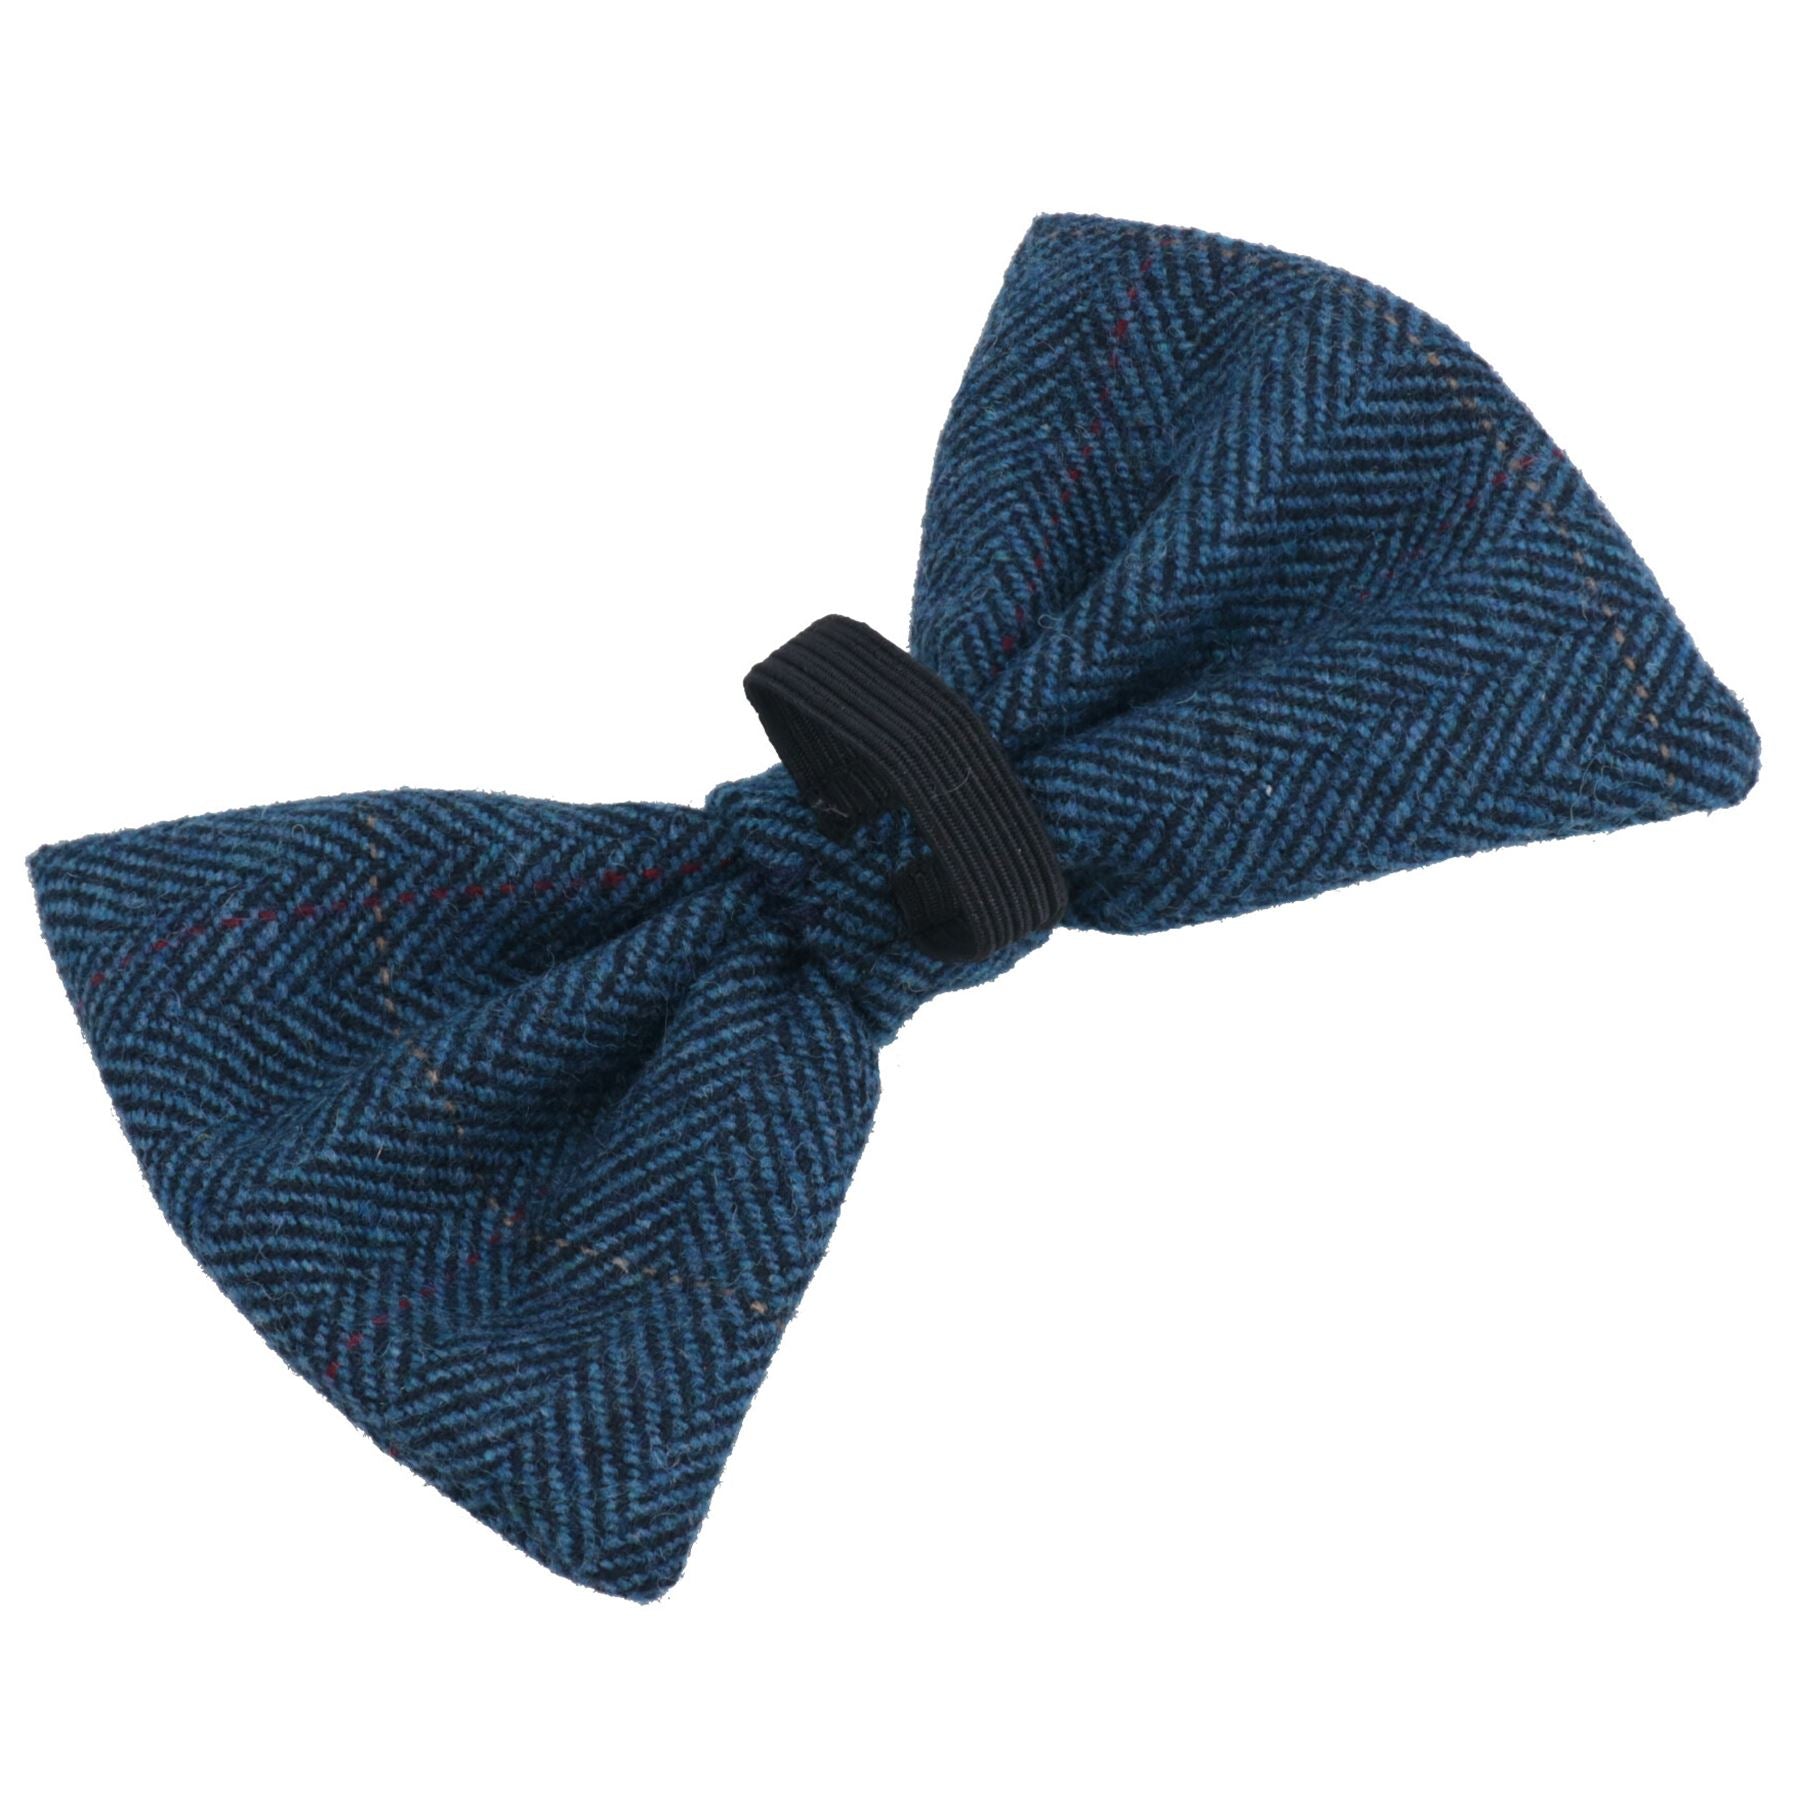 One Size Stylish Navy Tweed Dog Bow Tie For Fashionable Dogs With Collar Loop